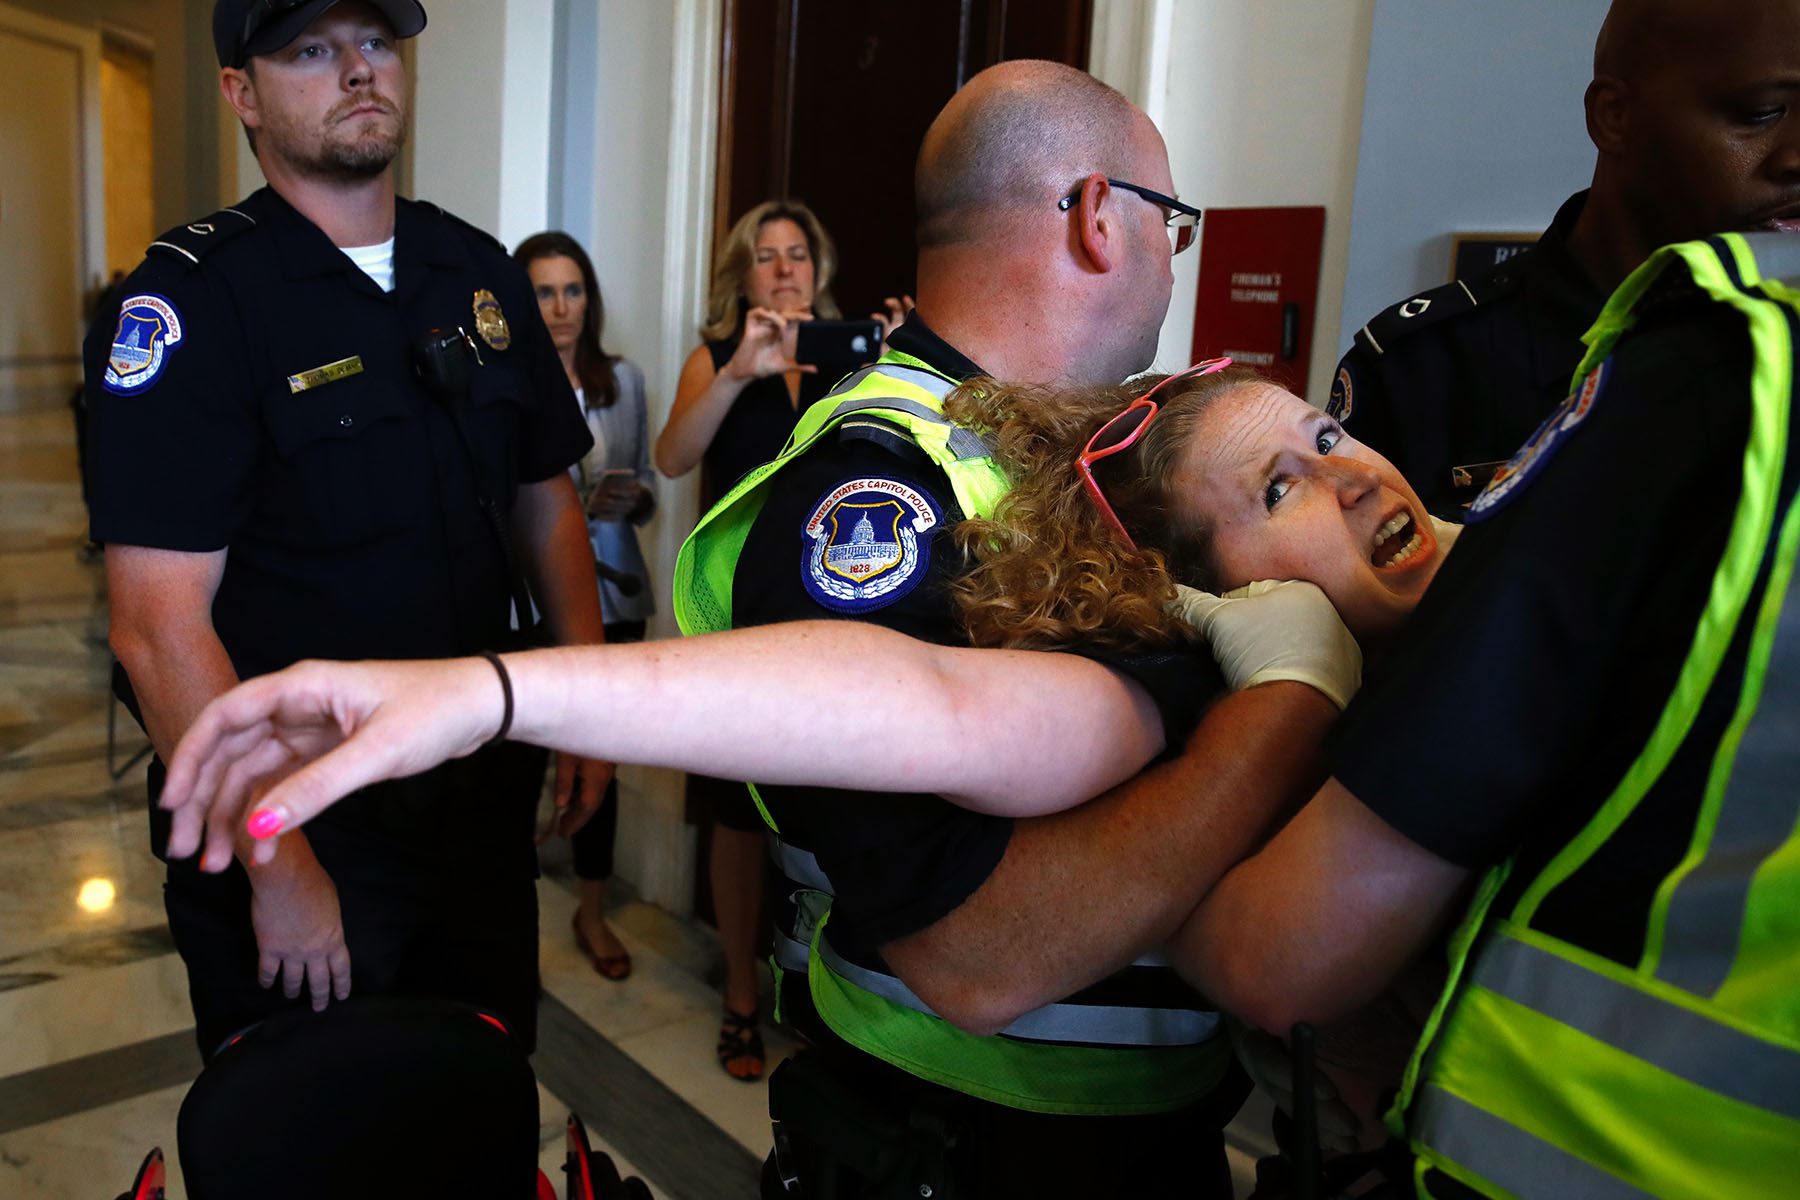 A woman is being carried by multiple capitol police officers. She seems to be struggling greatly.